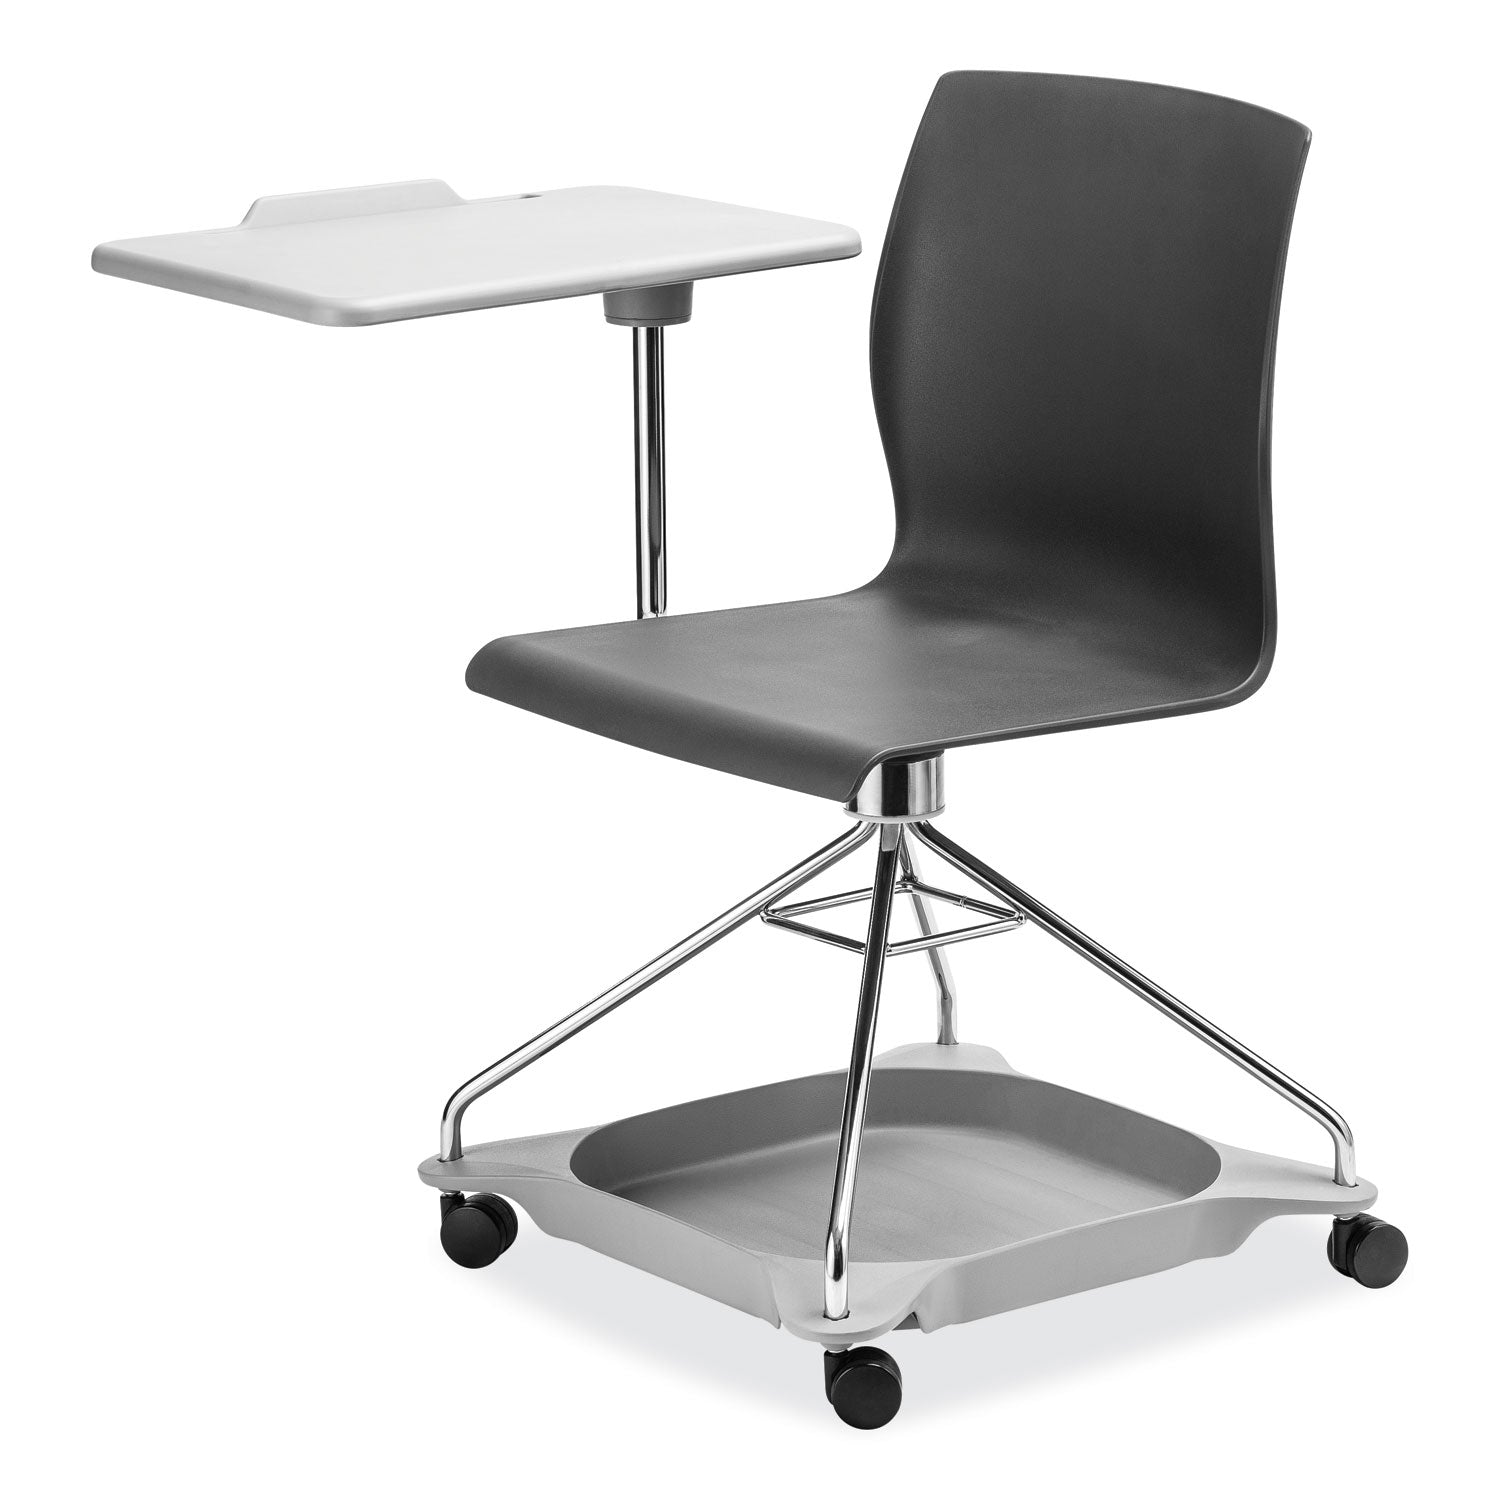 cogo-mobile-tablet-chair-supports-up-to-440-lb-1875-seat-height-black-seat-back-chrome-frameships-in-1-3-business-days_npscogo10 - 3